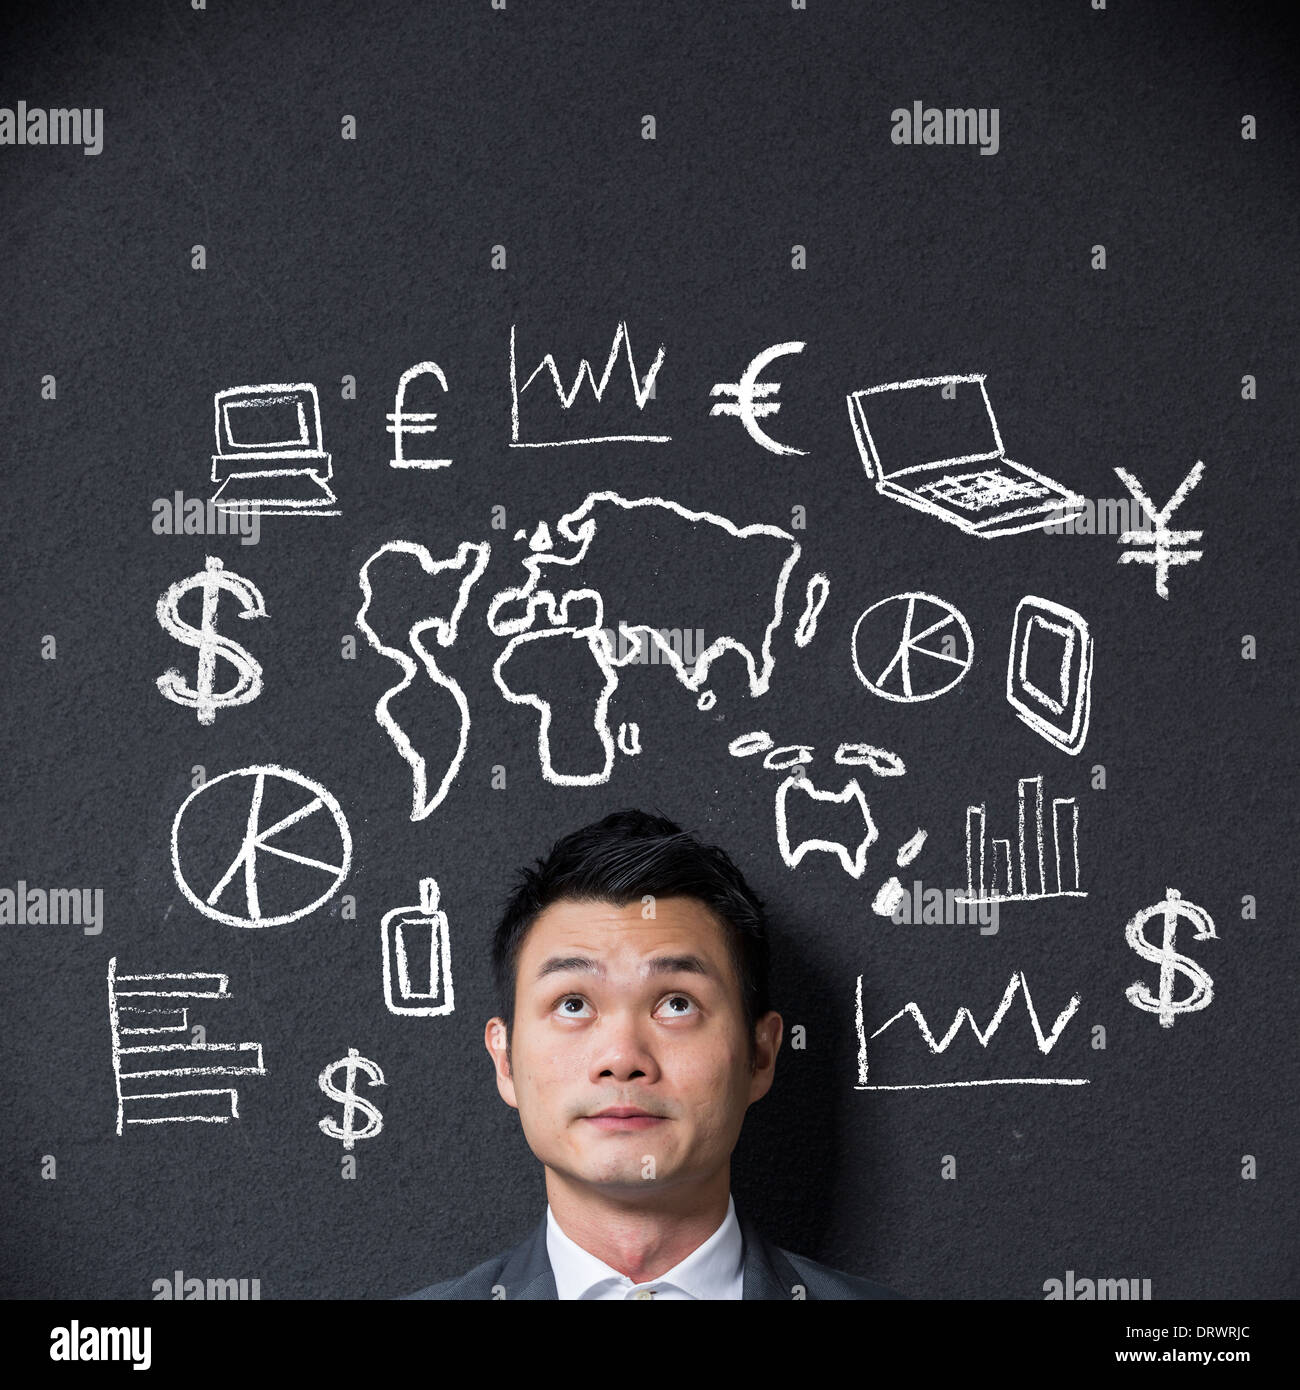 Chinese businessman in front of a sketch or diagram about business and Commerce Stock Photo